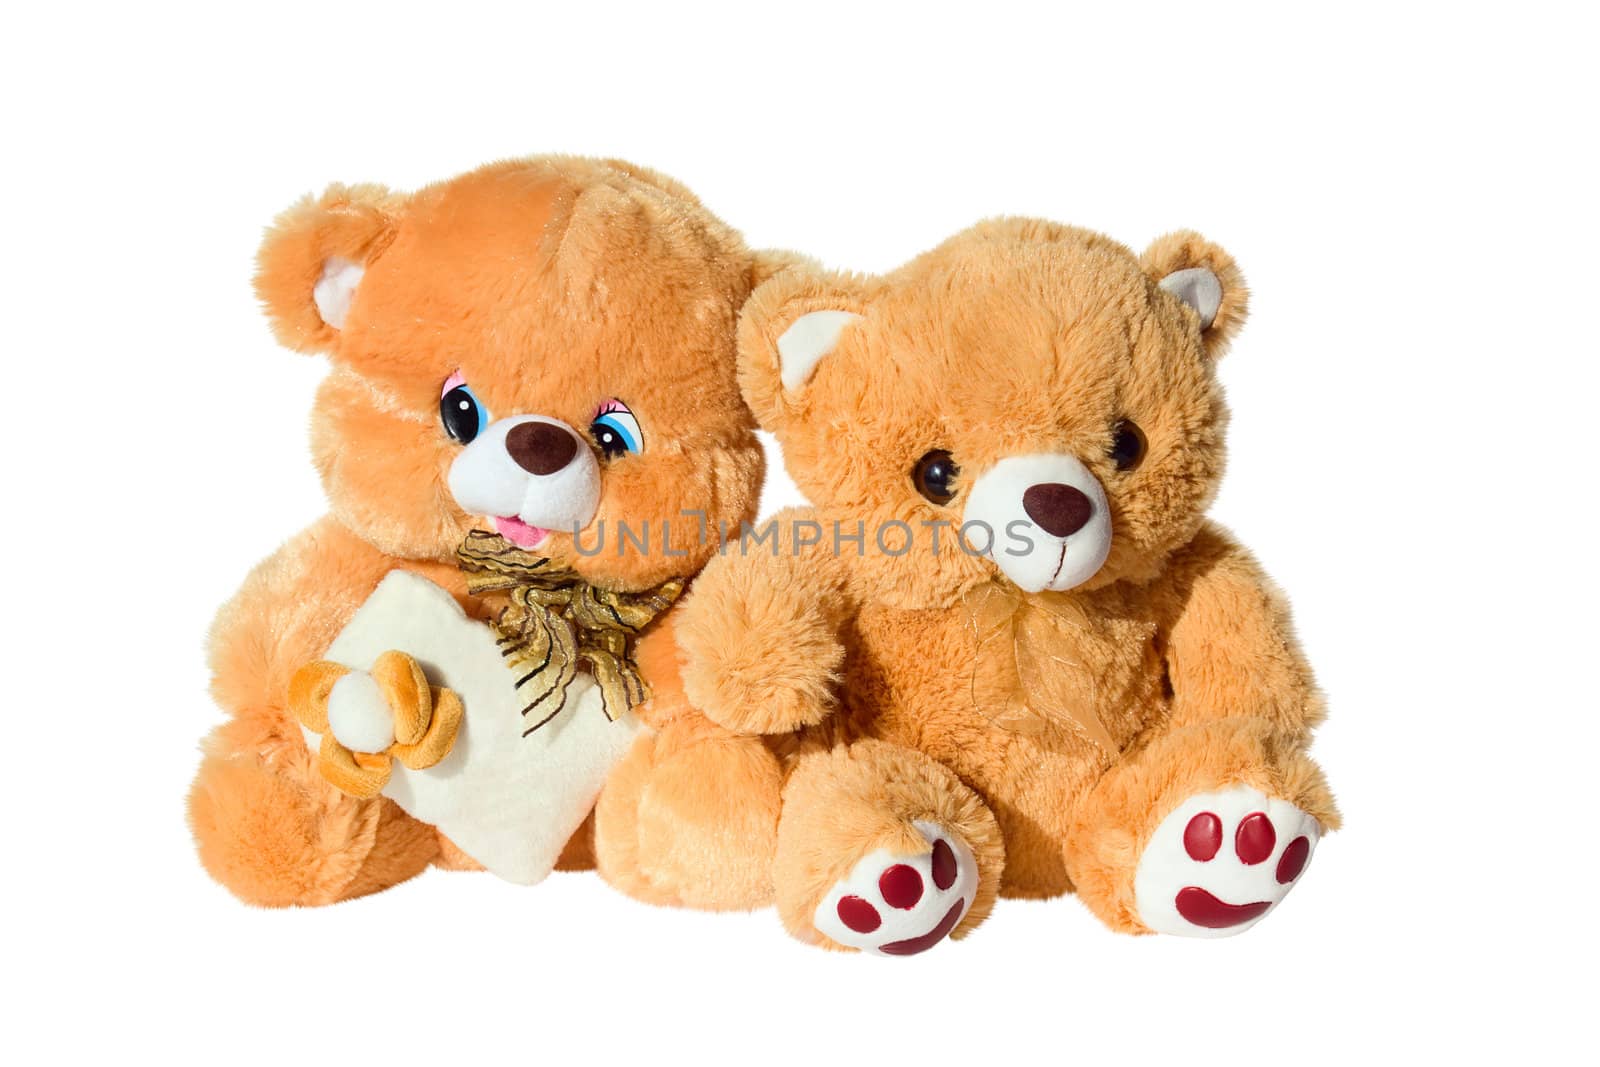 Two brown teddy bears by zhannaprokopeva